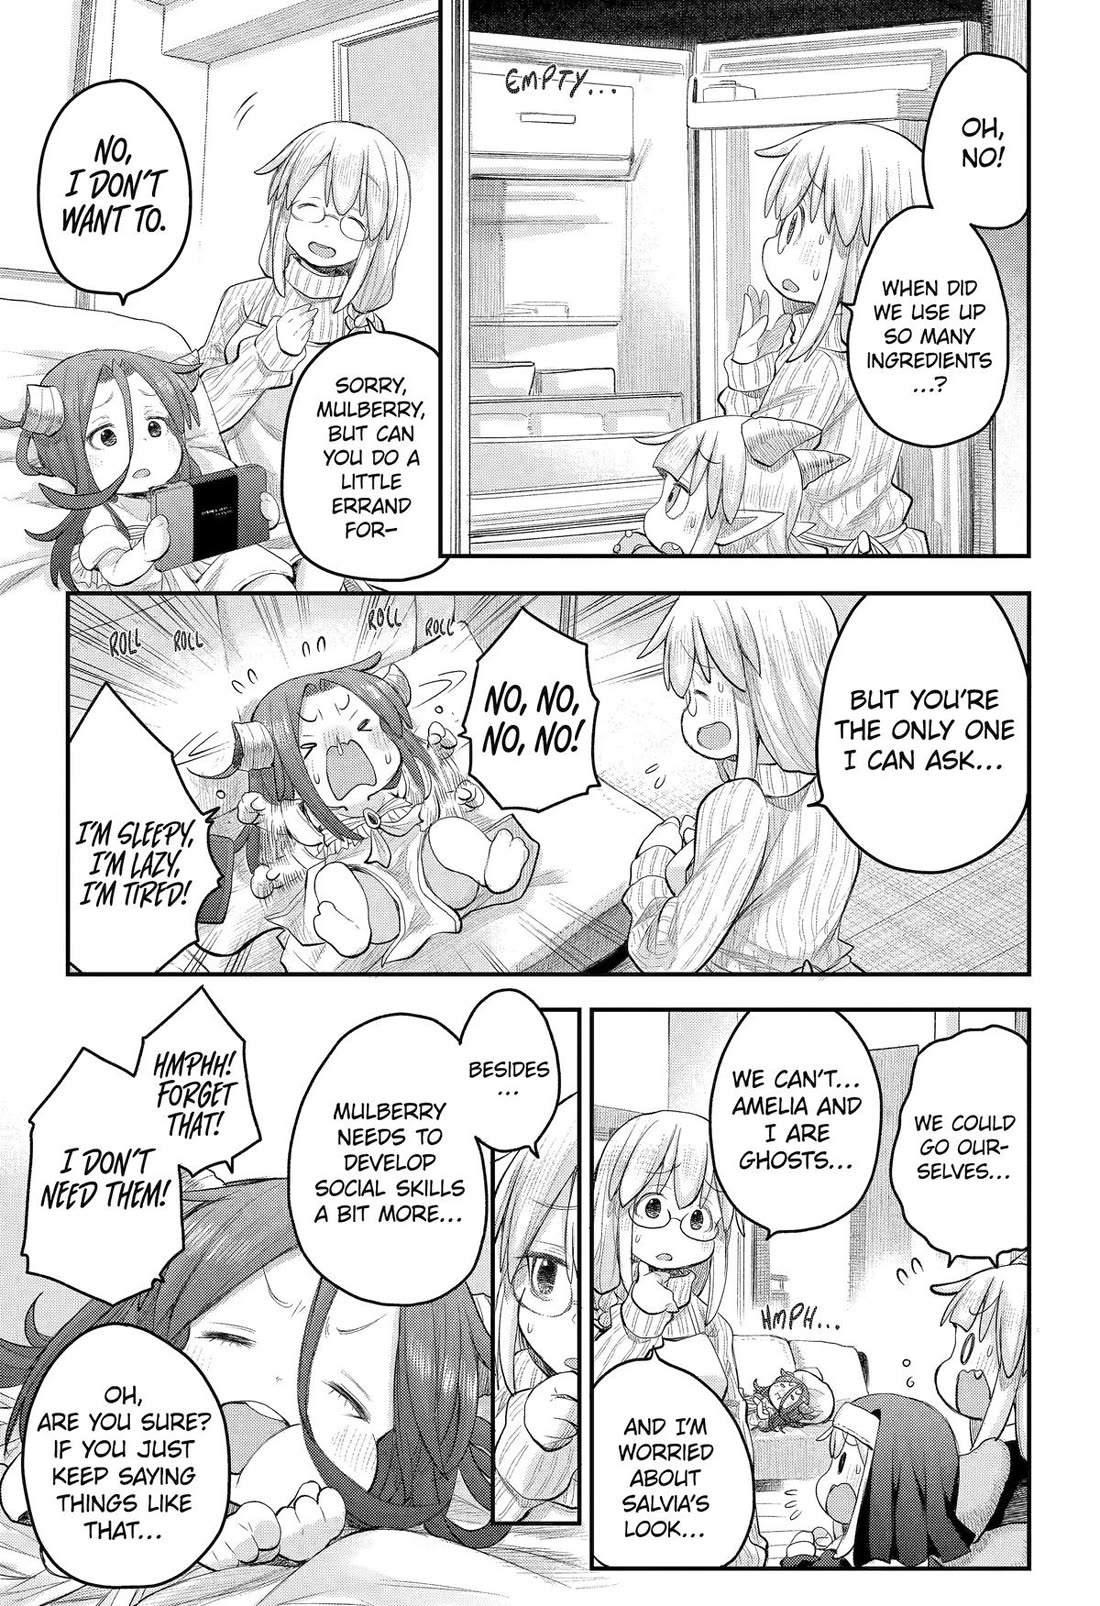 Ms. Corporate Slave Wants to be Healed by a Loli Spirit - chapter 114 - #1